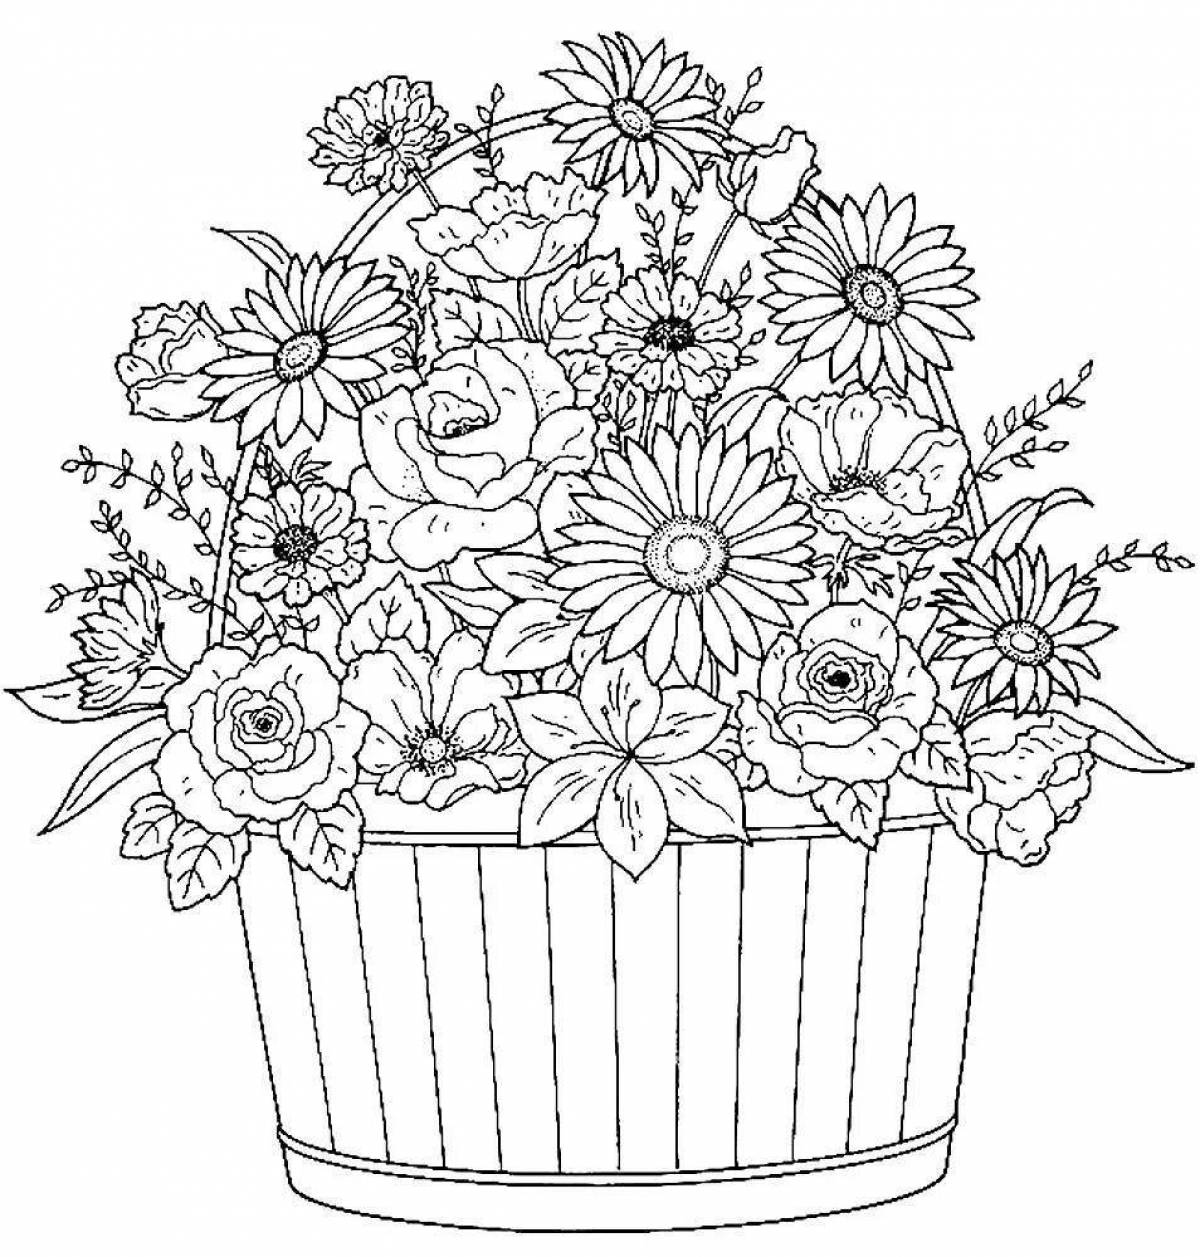 Coloring book shining bouquet for mom